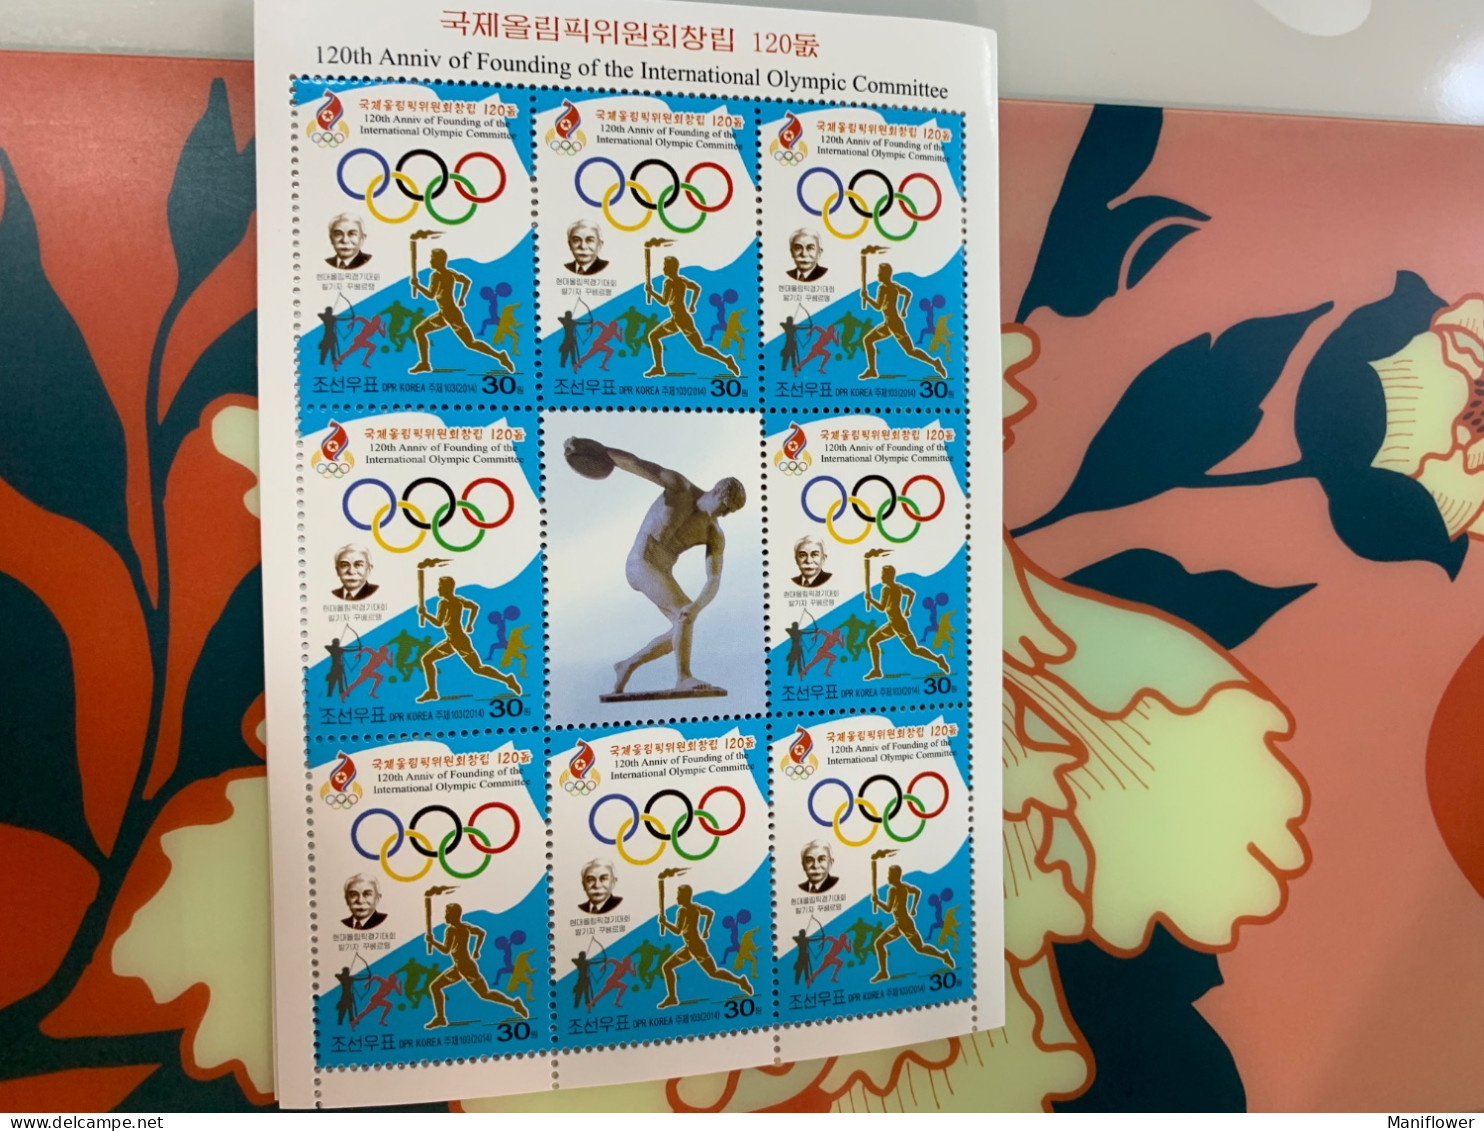 Korea Stamp MNH Olympic Committee Archery Table Tennis Perf Weightlifting - Weightlifting